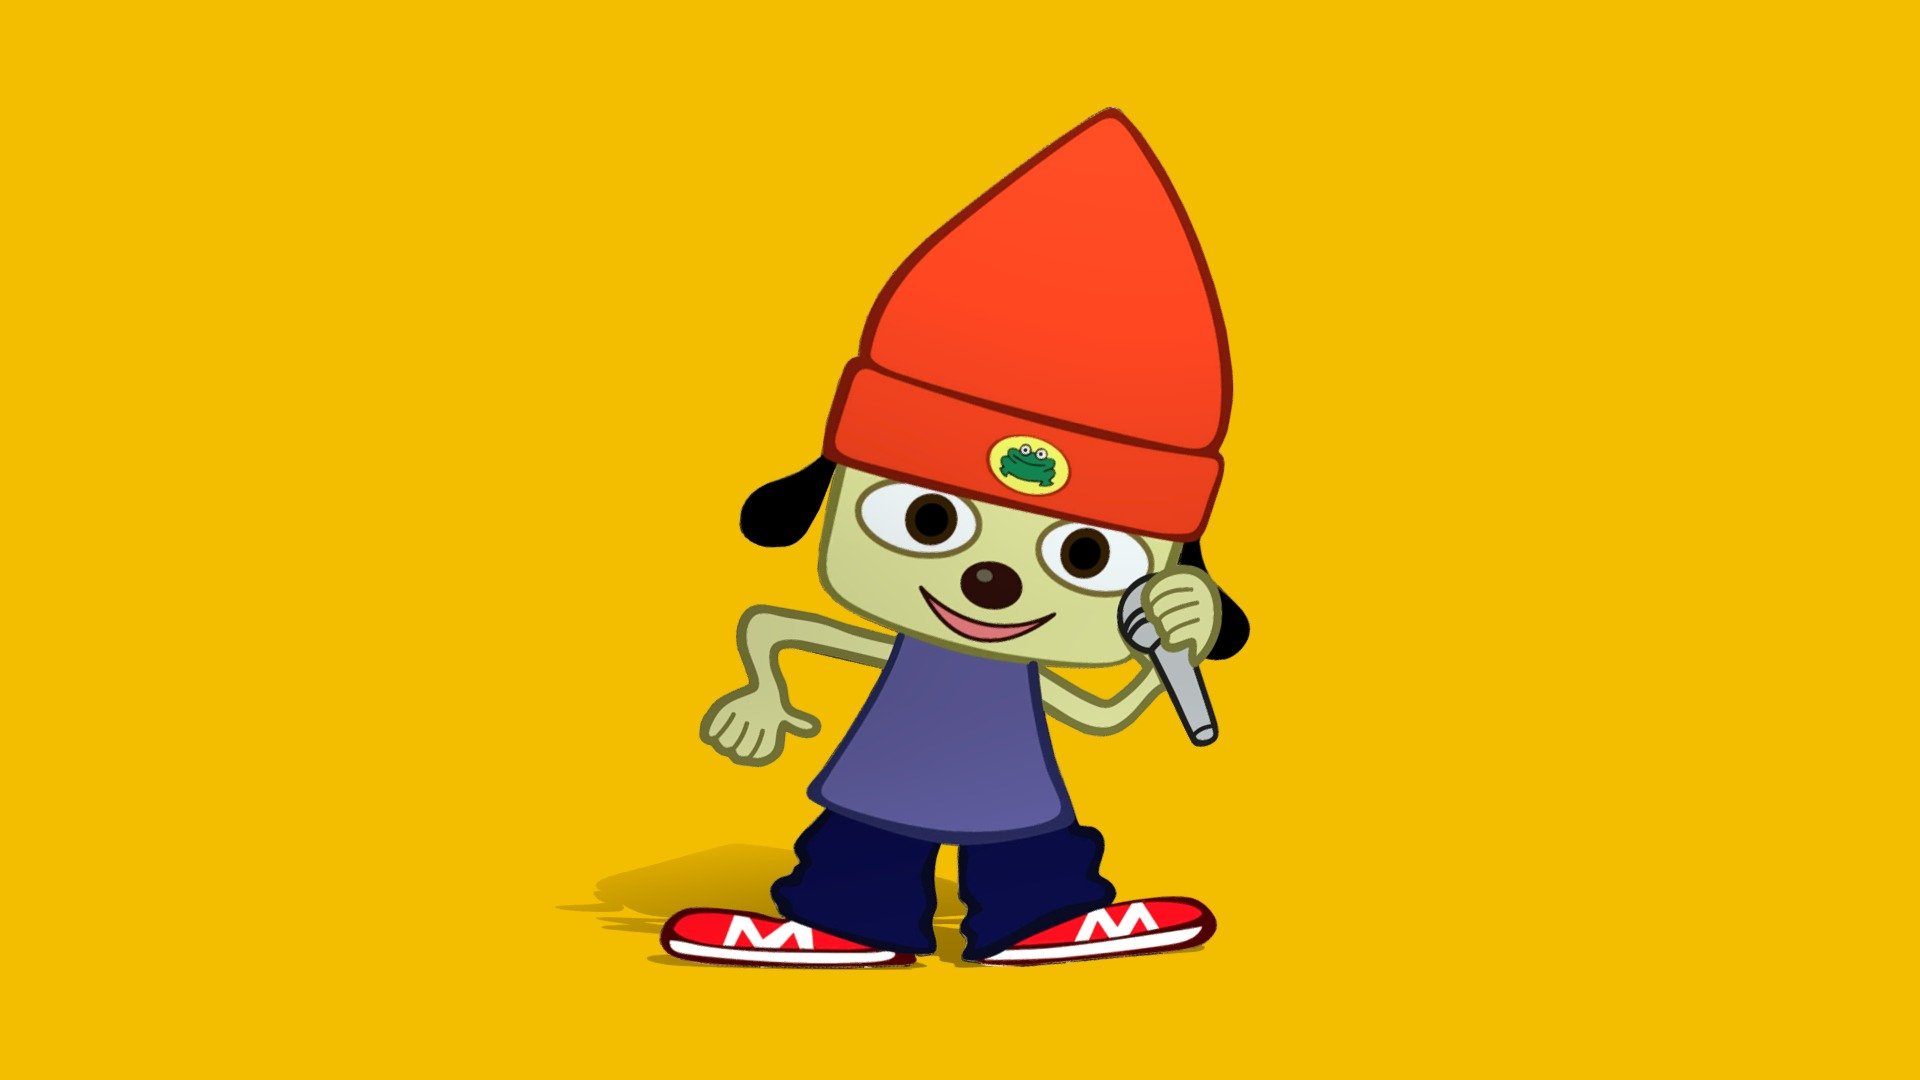 PlayStation - PaRappa the Rapper - PaRappa - The Models Resource